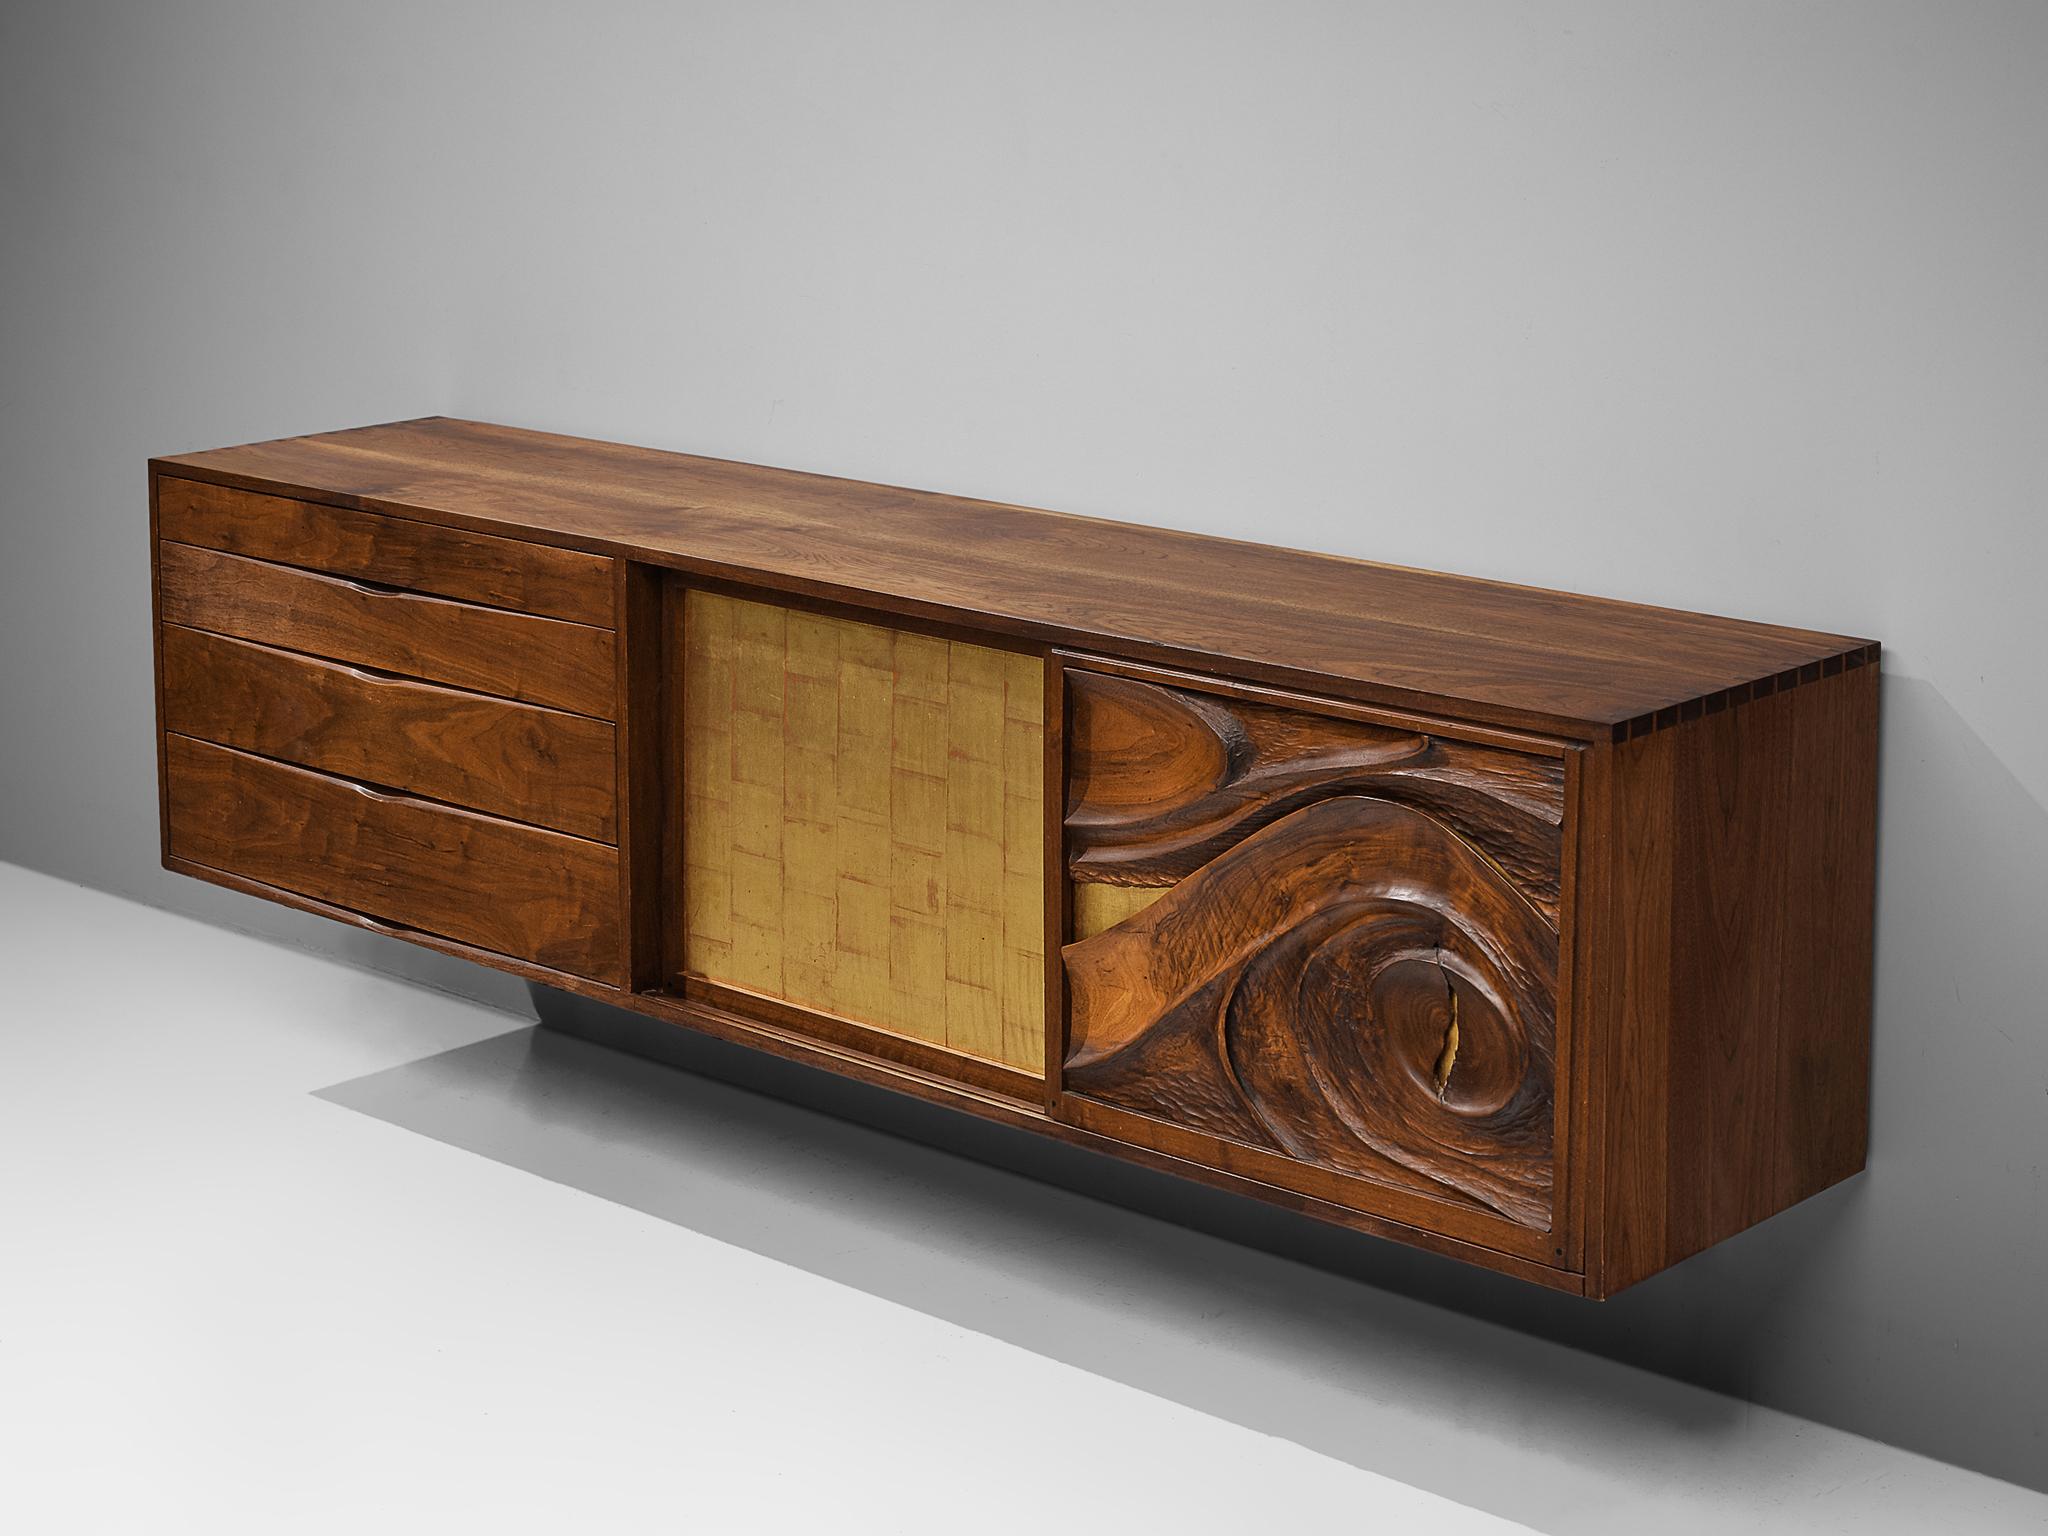 Phillip Lloyd Powell, wall-mounted cabinet, American walnut, gold leaf, United States, 1970s

This exquisite and elegant wall-mounted sideboard is designed by Phillip Lloyd Powell in the 1970s. The sideboard has three compartments, all with their